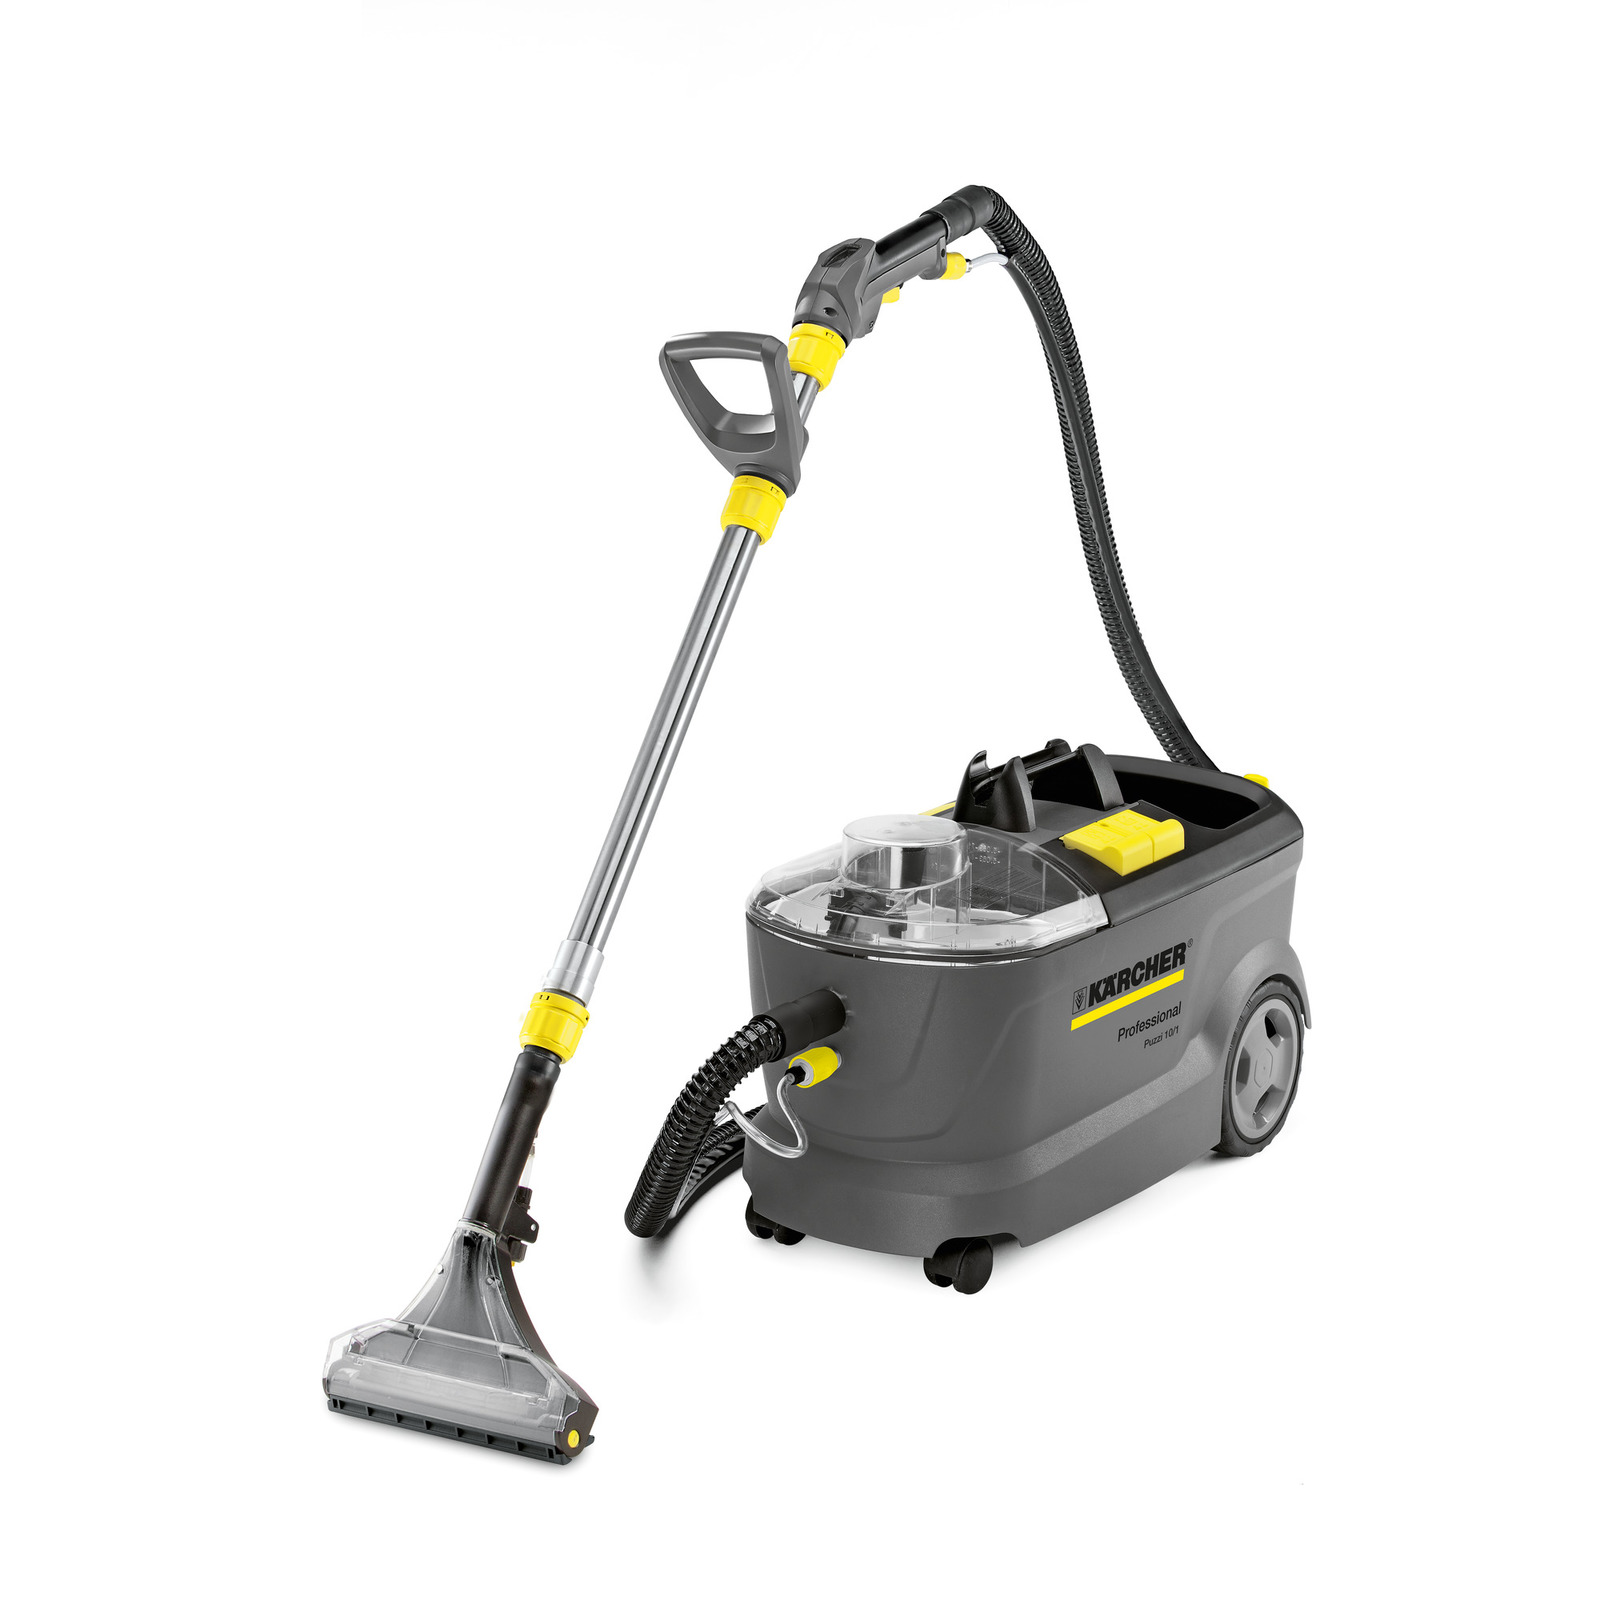 Karcher 1.100-133.0 Puzzi 10/1 CA Carpet and Upholstery Cleaning Machine 100 2.6 Gal 12 psi 8 ft Hose Set and Dual Tool Set